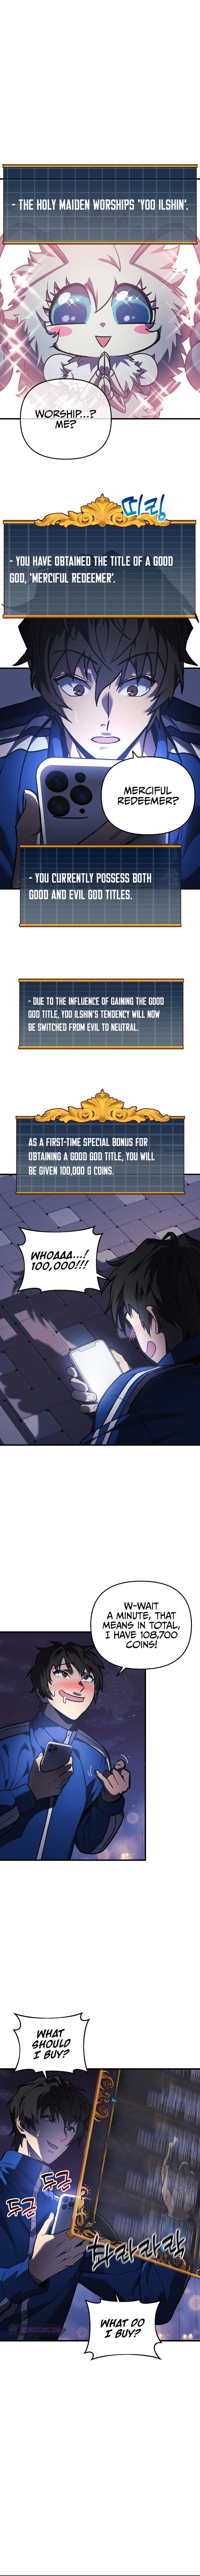 I’ll be Taking a Break for Personal Reasons Chapter 8 page 6